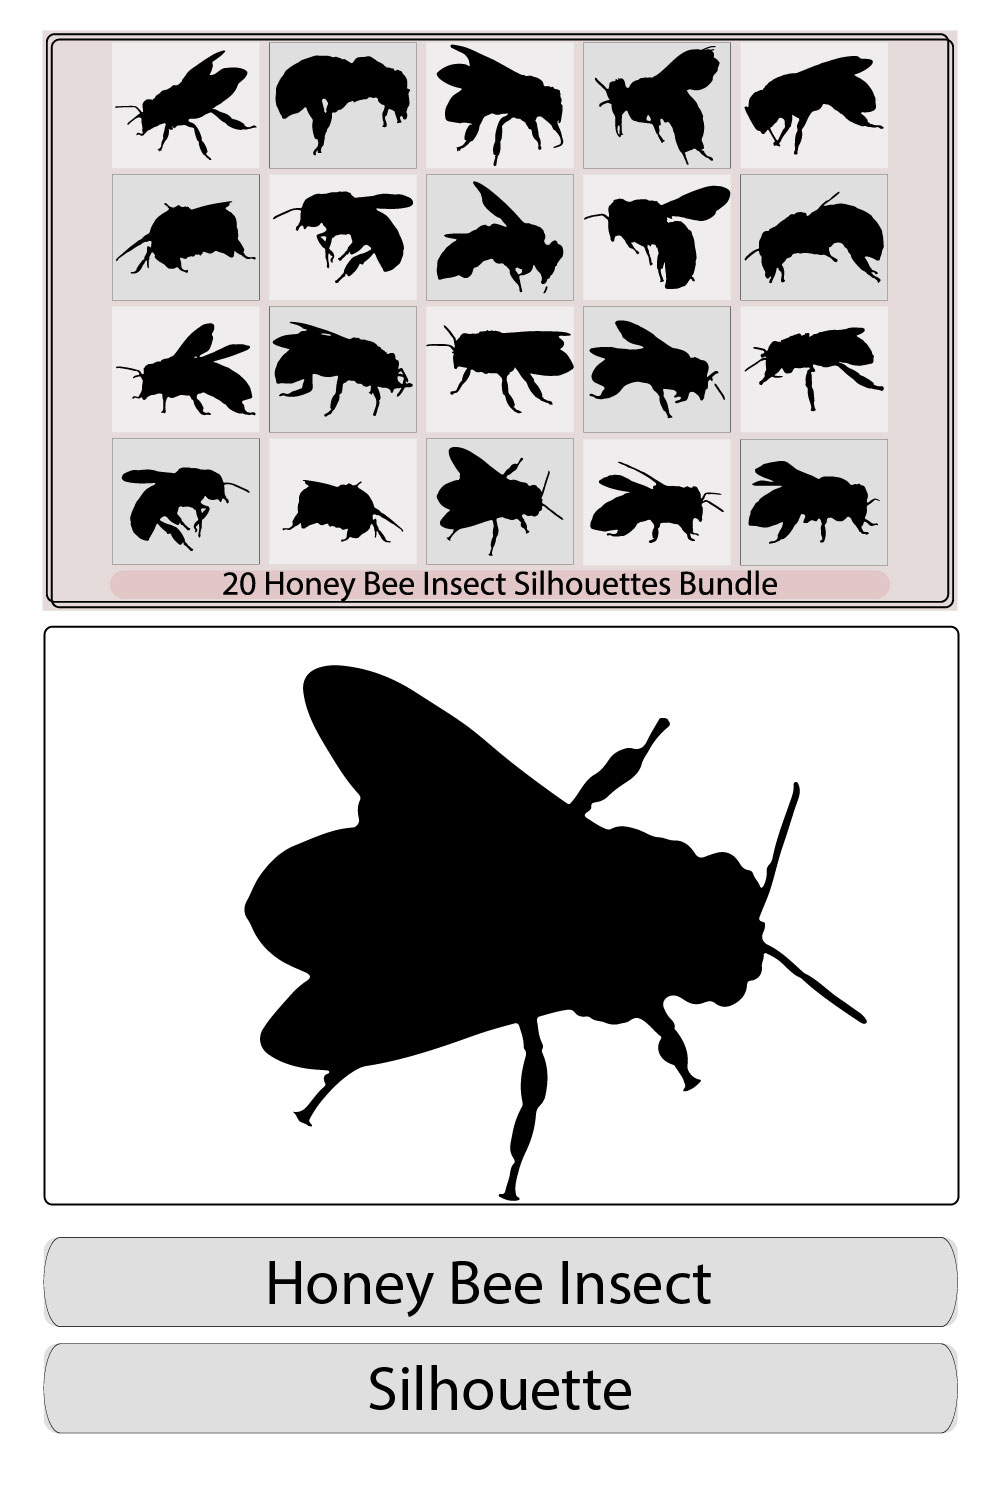 Honeybee silhouettes clipart collection,Bee Icon Bug Logo on White Background Vector,Graphic illustration of silhouette honey bee,bee icon pinterest preview image.